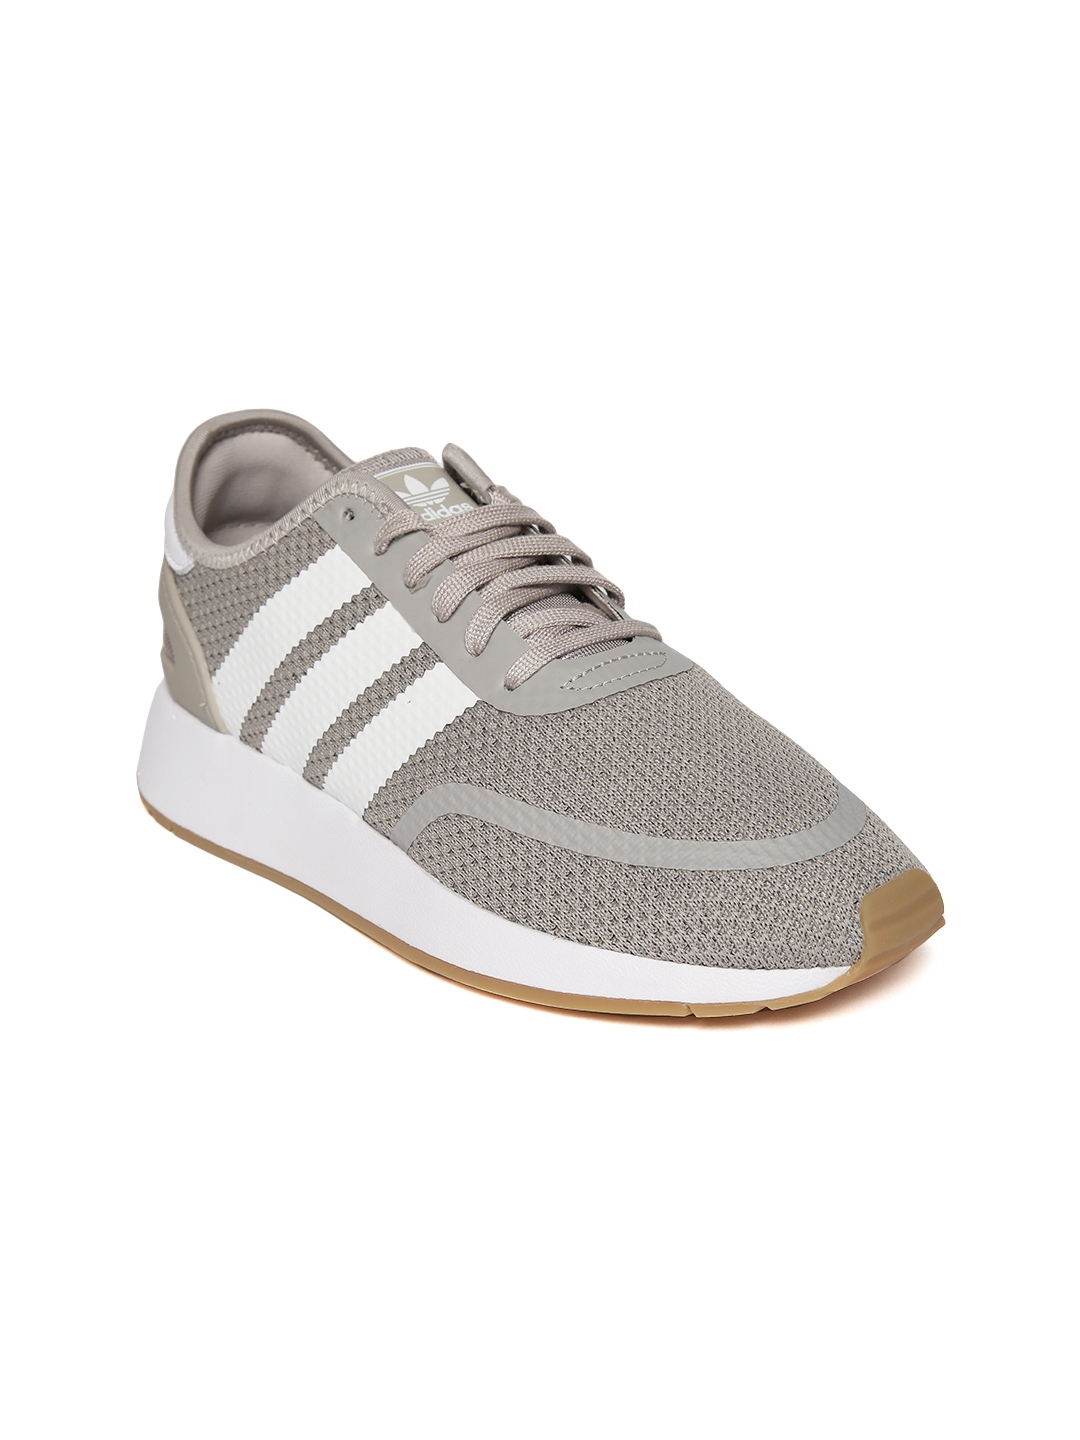 adidas beige shoes womens